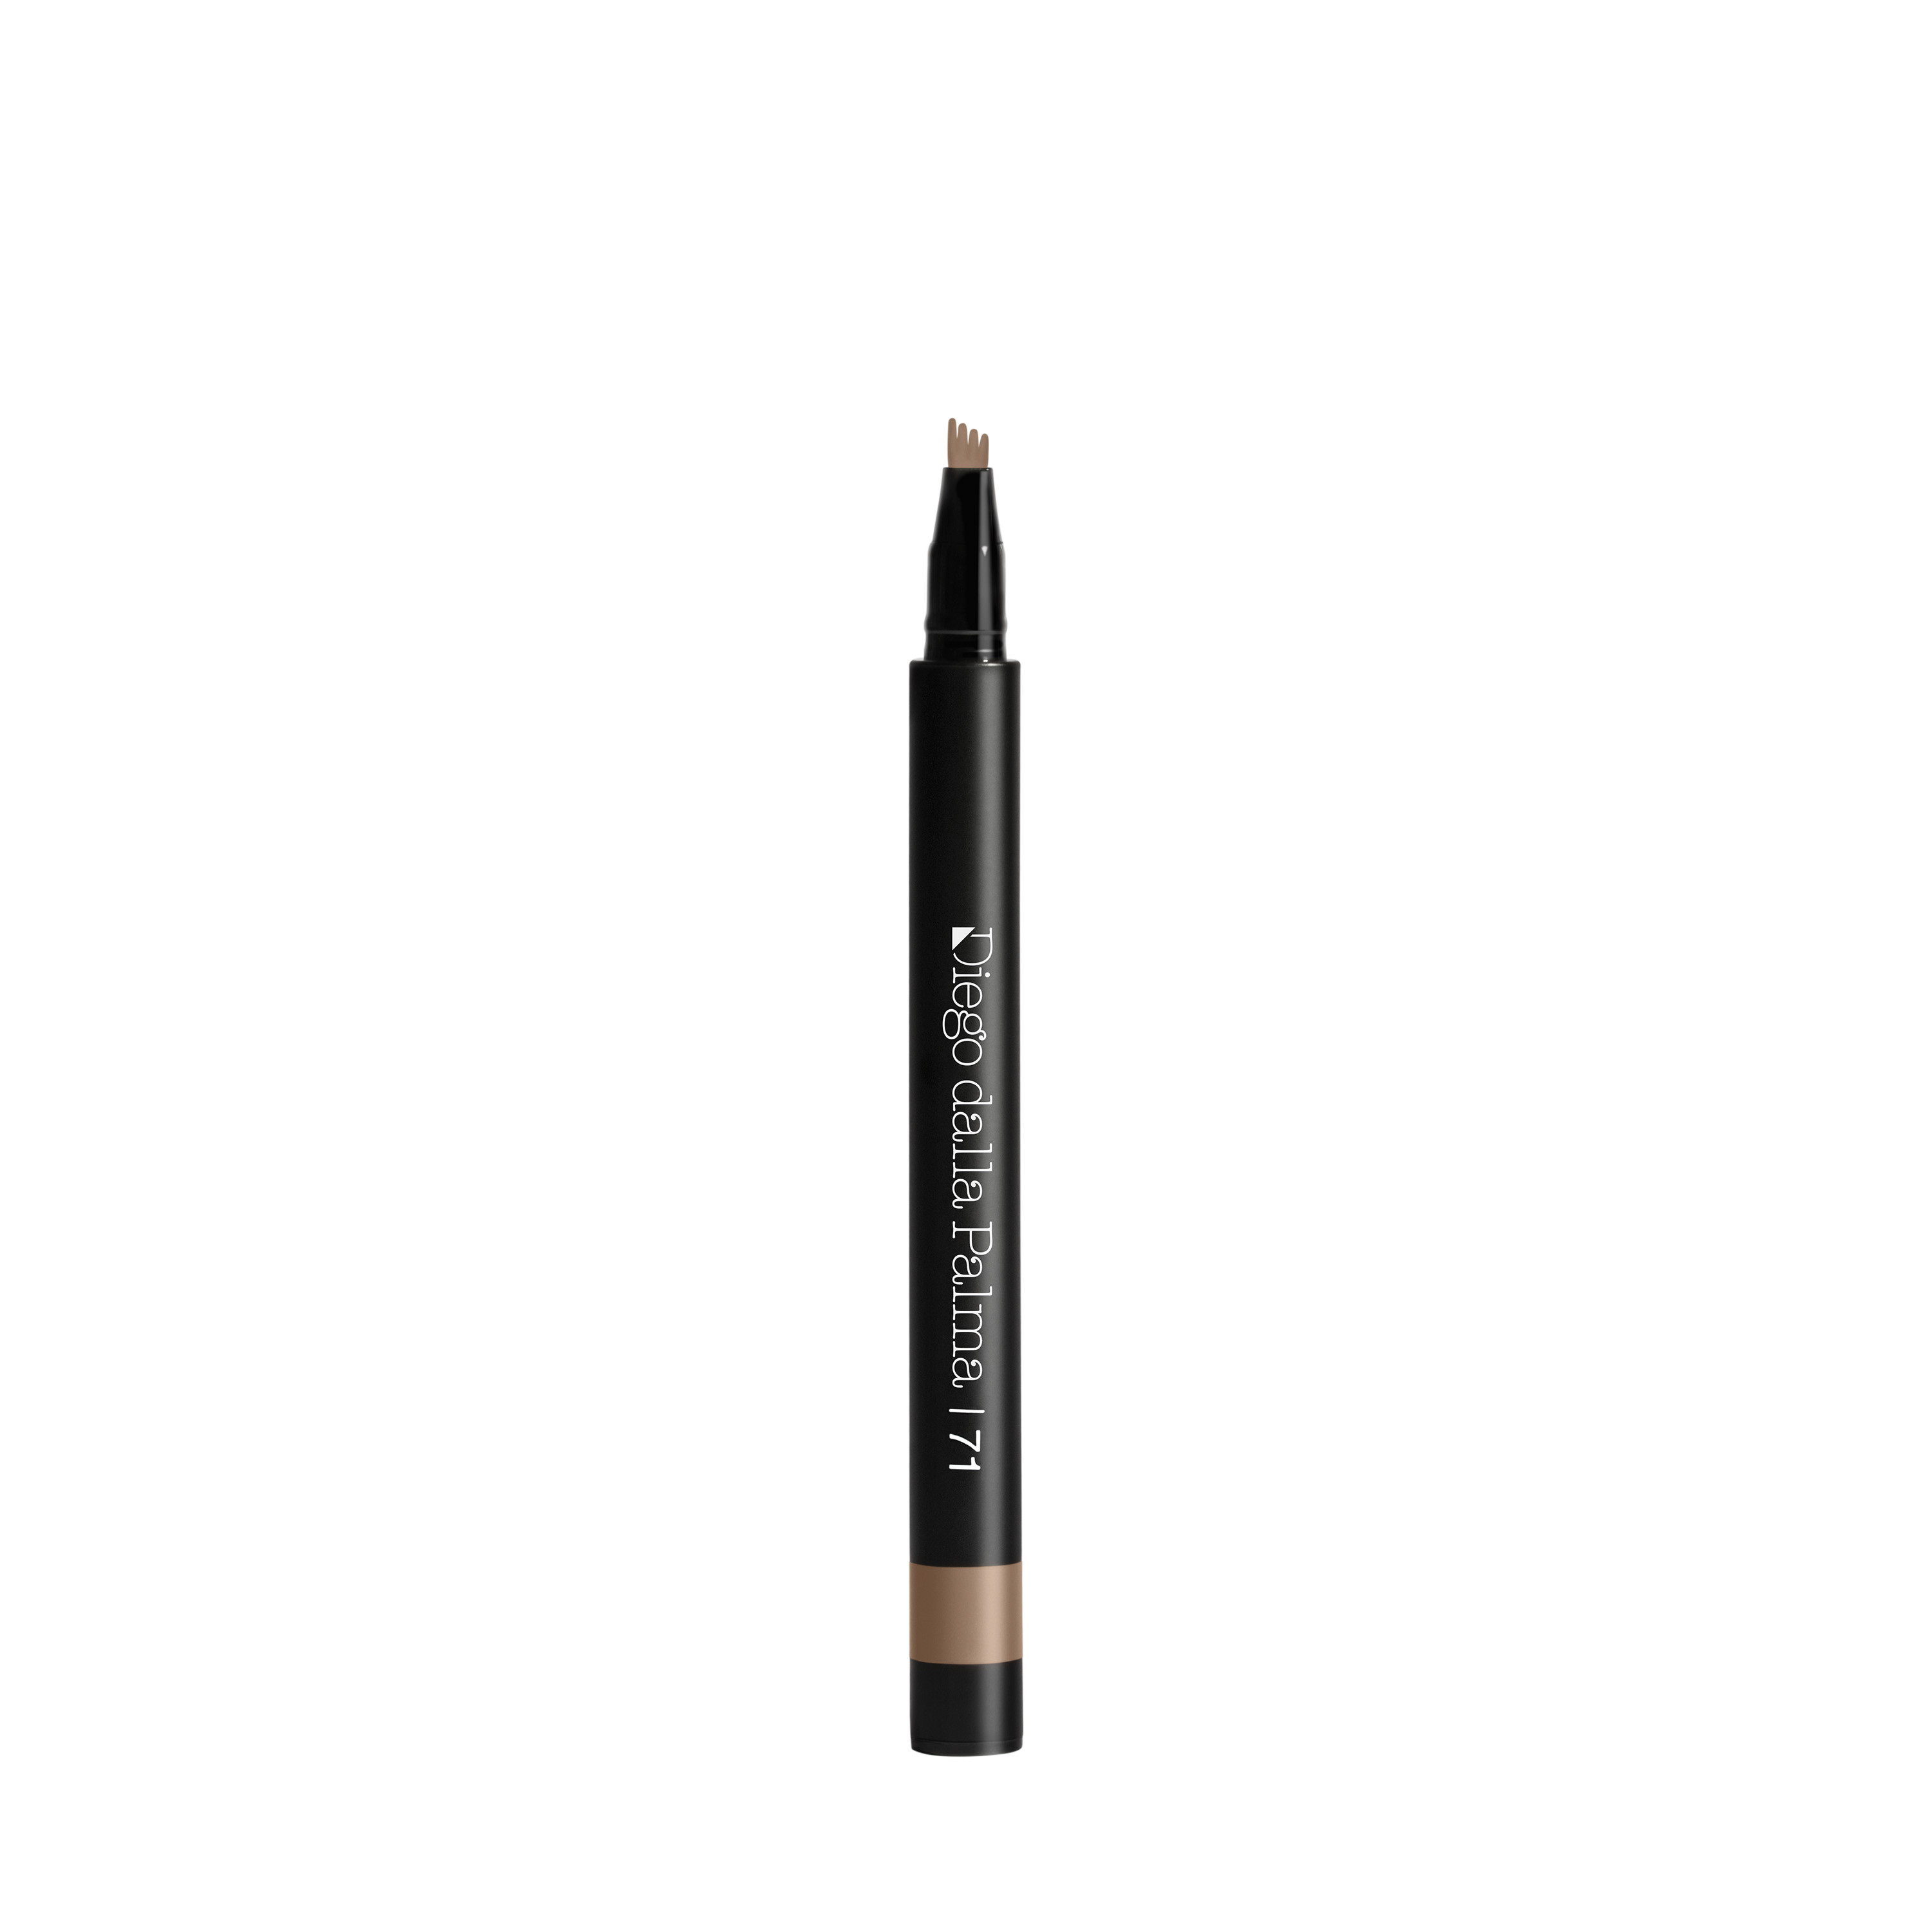 Microblading Effect Eyebrow Pen Long Lasting 24H - 71 cappuccino, Light Brown, large image number 0